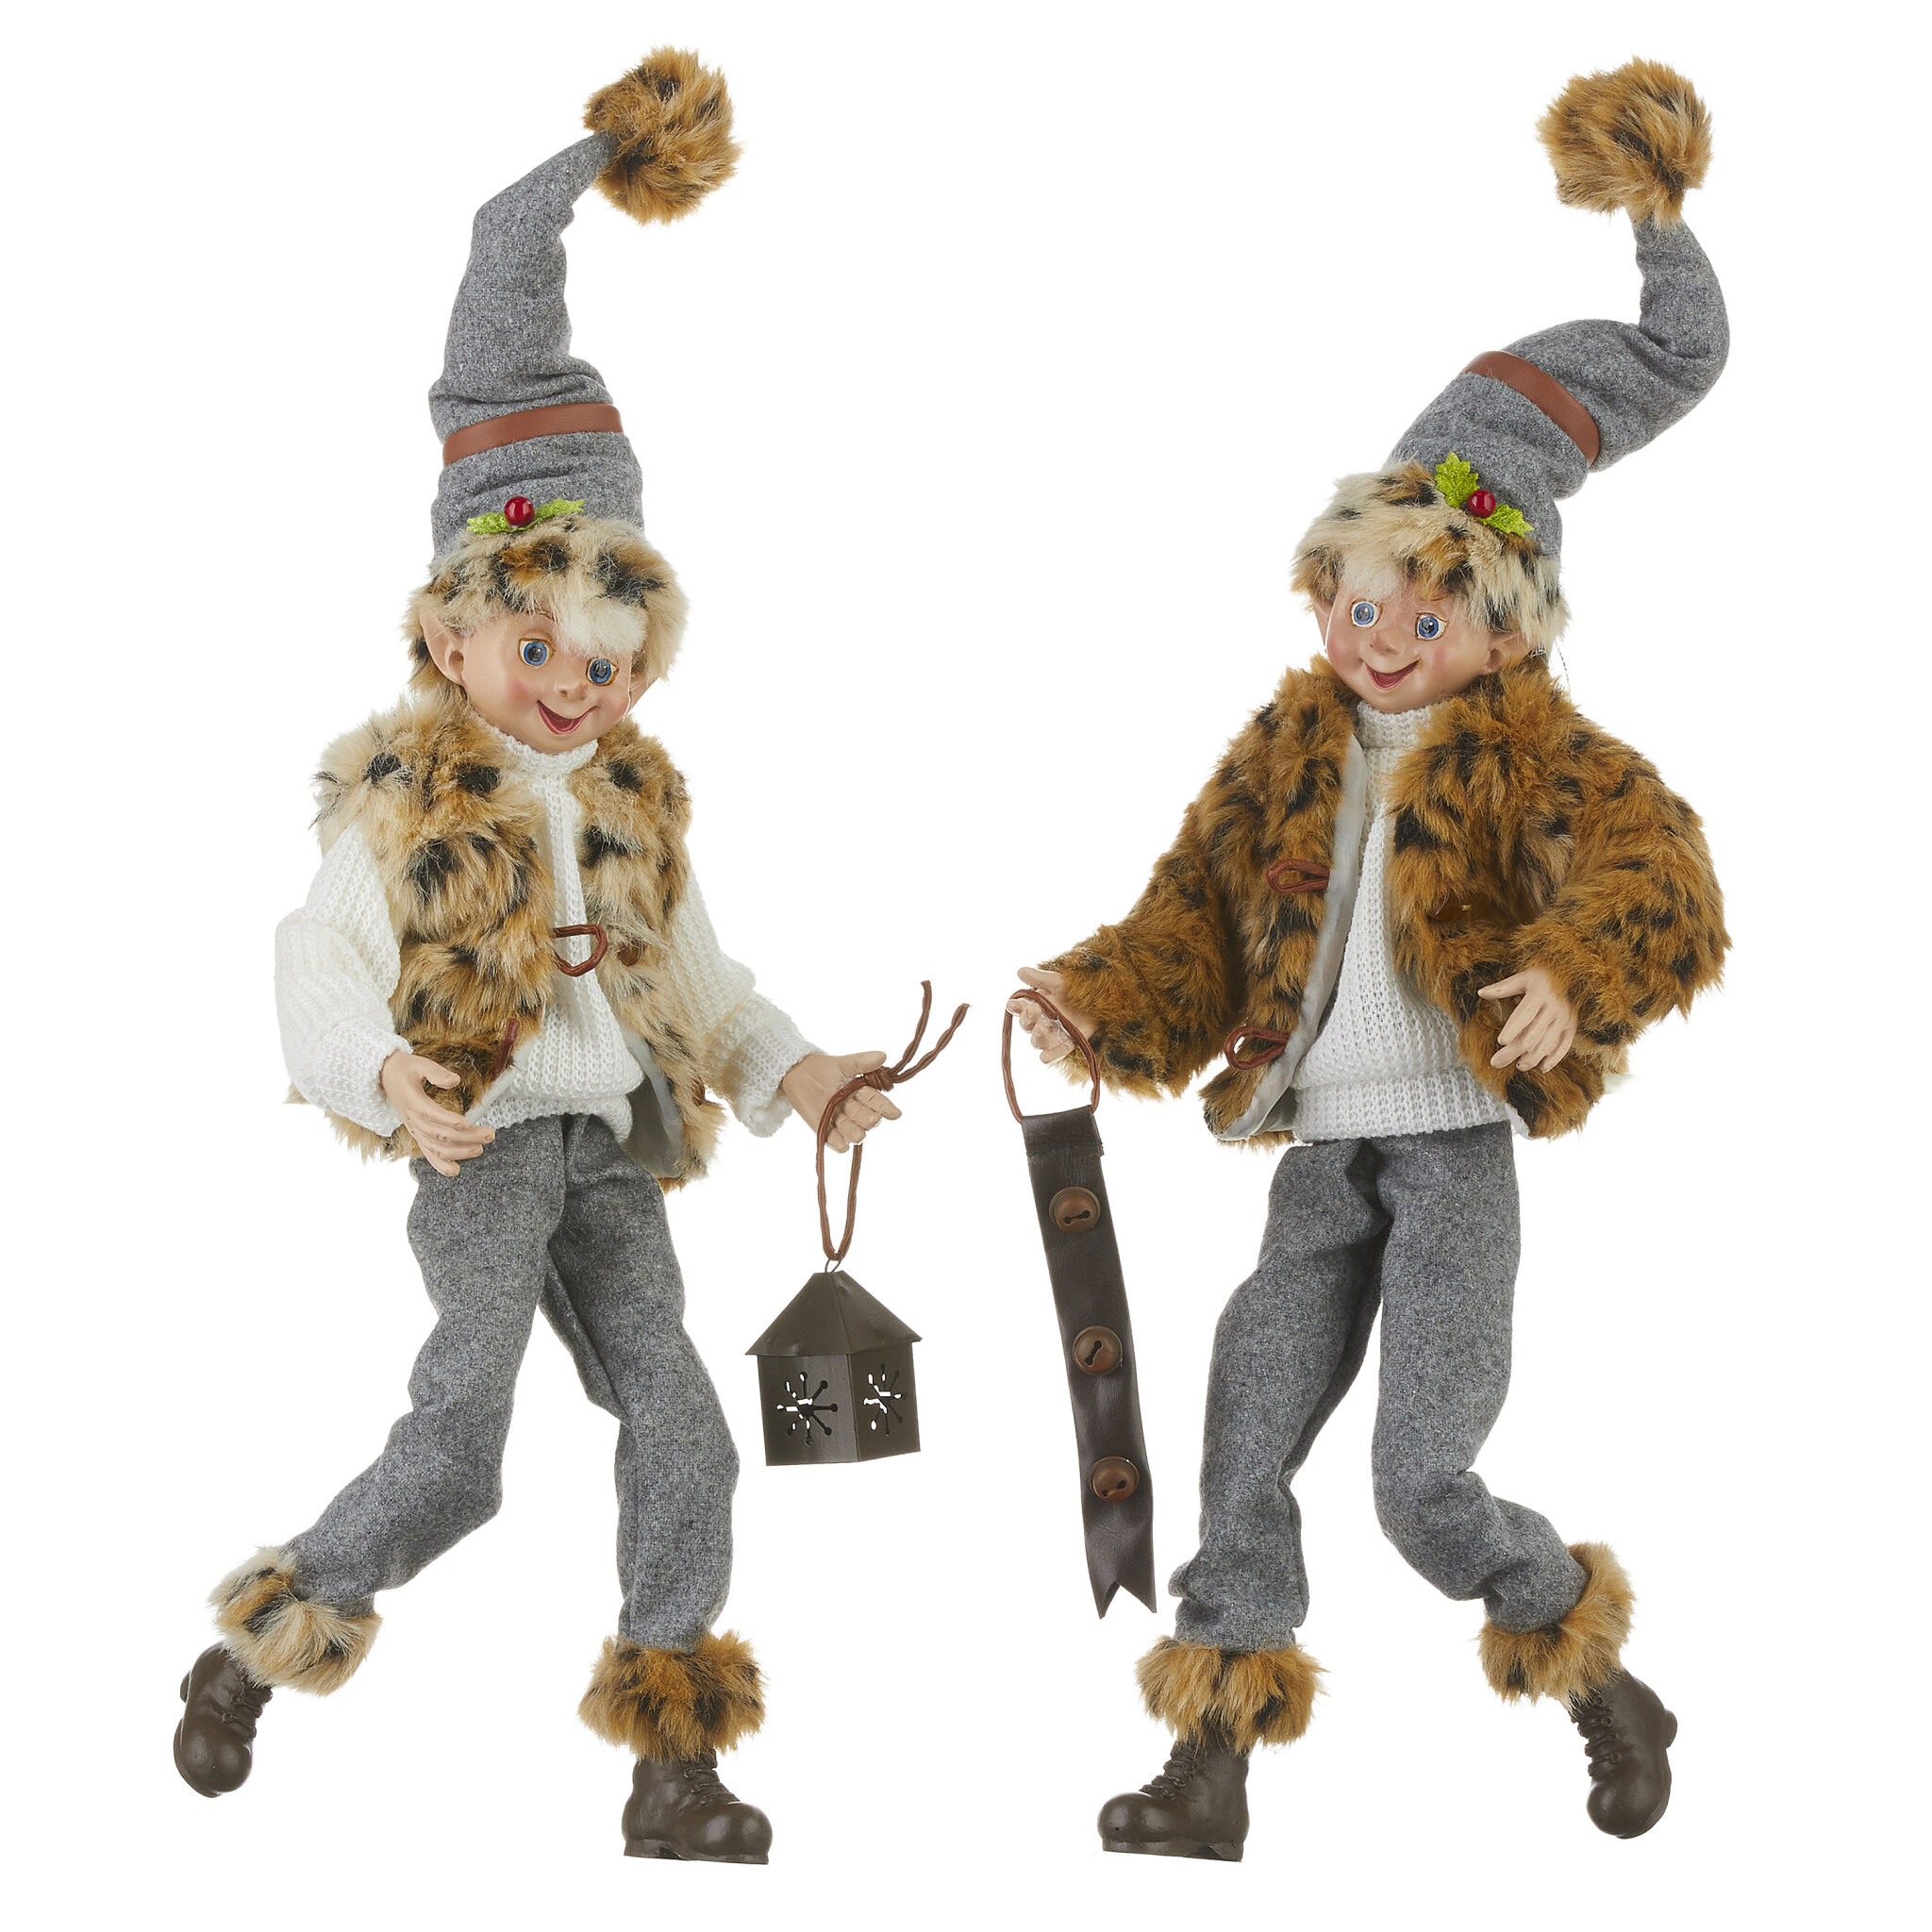 16 Inch Cozy Knit White Christmas Posable Elf Figures SET OF 2